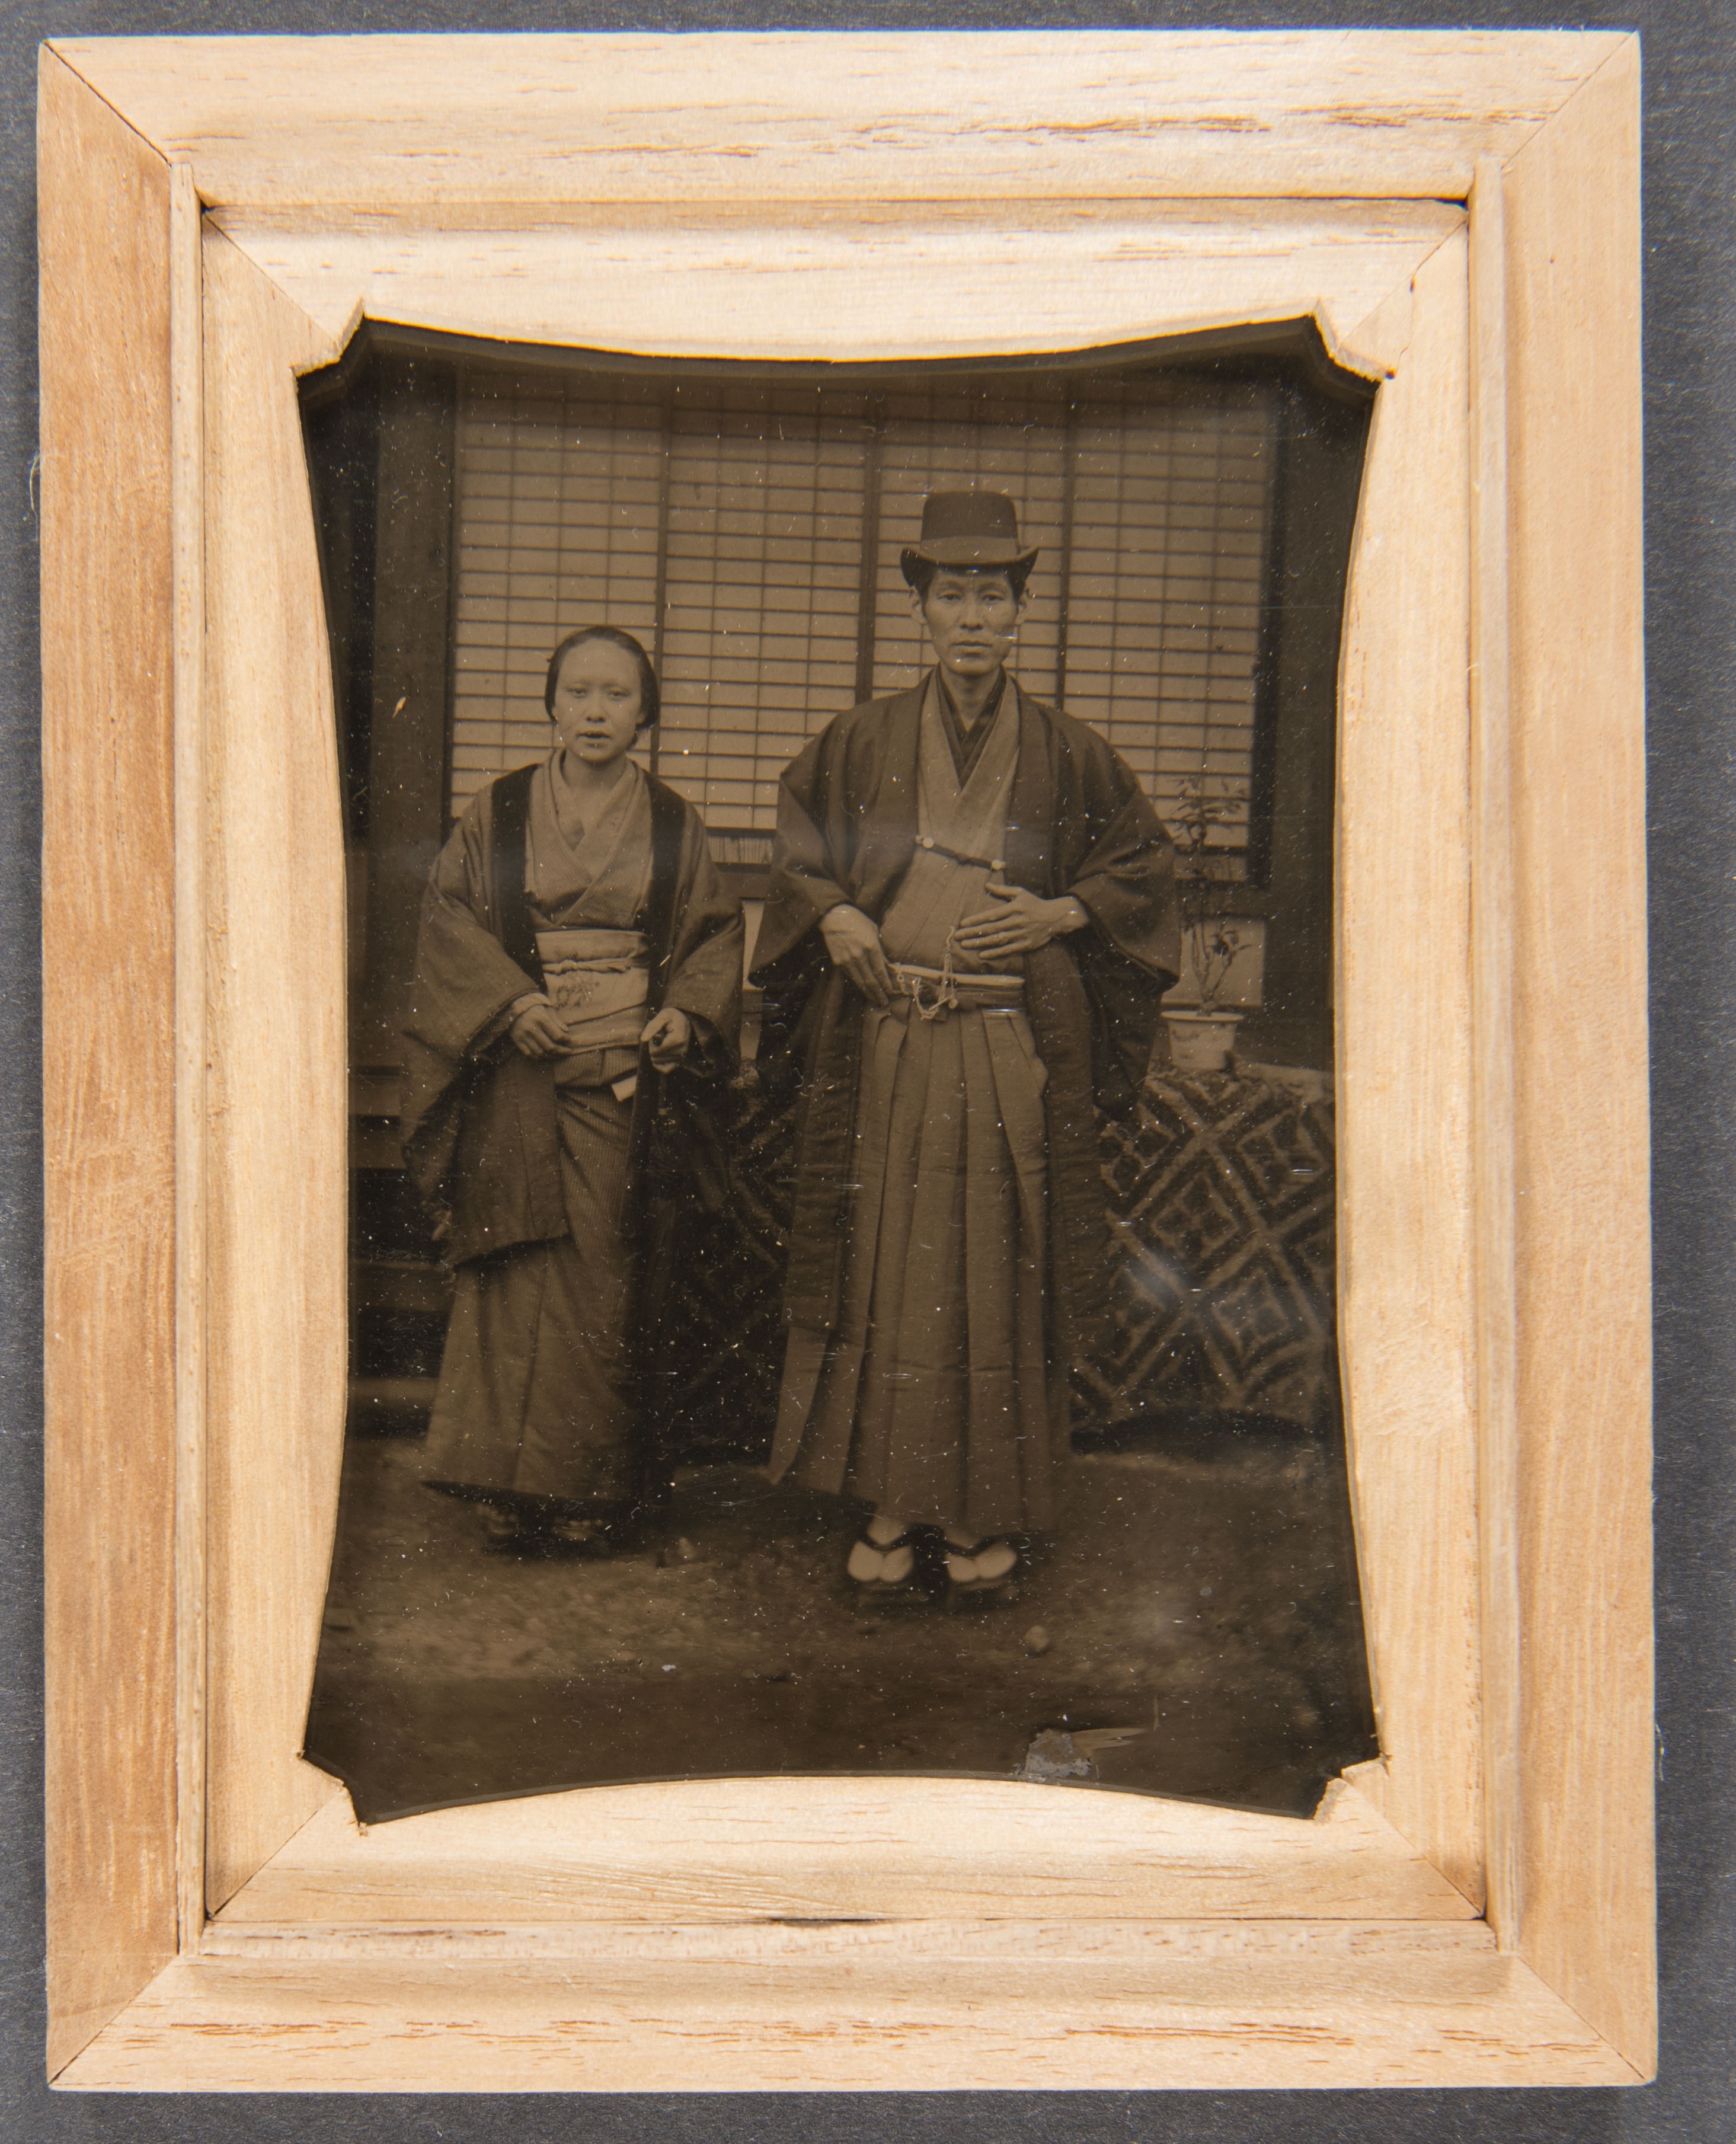 sepia toned photograph of a Japanese man and woman